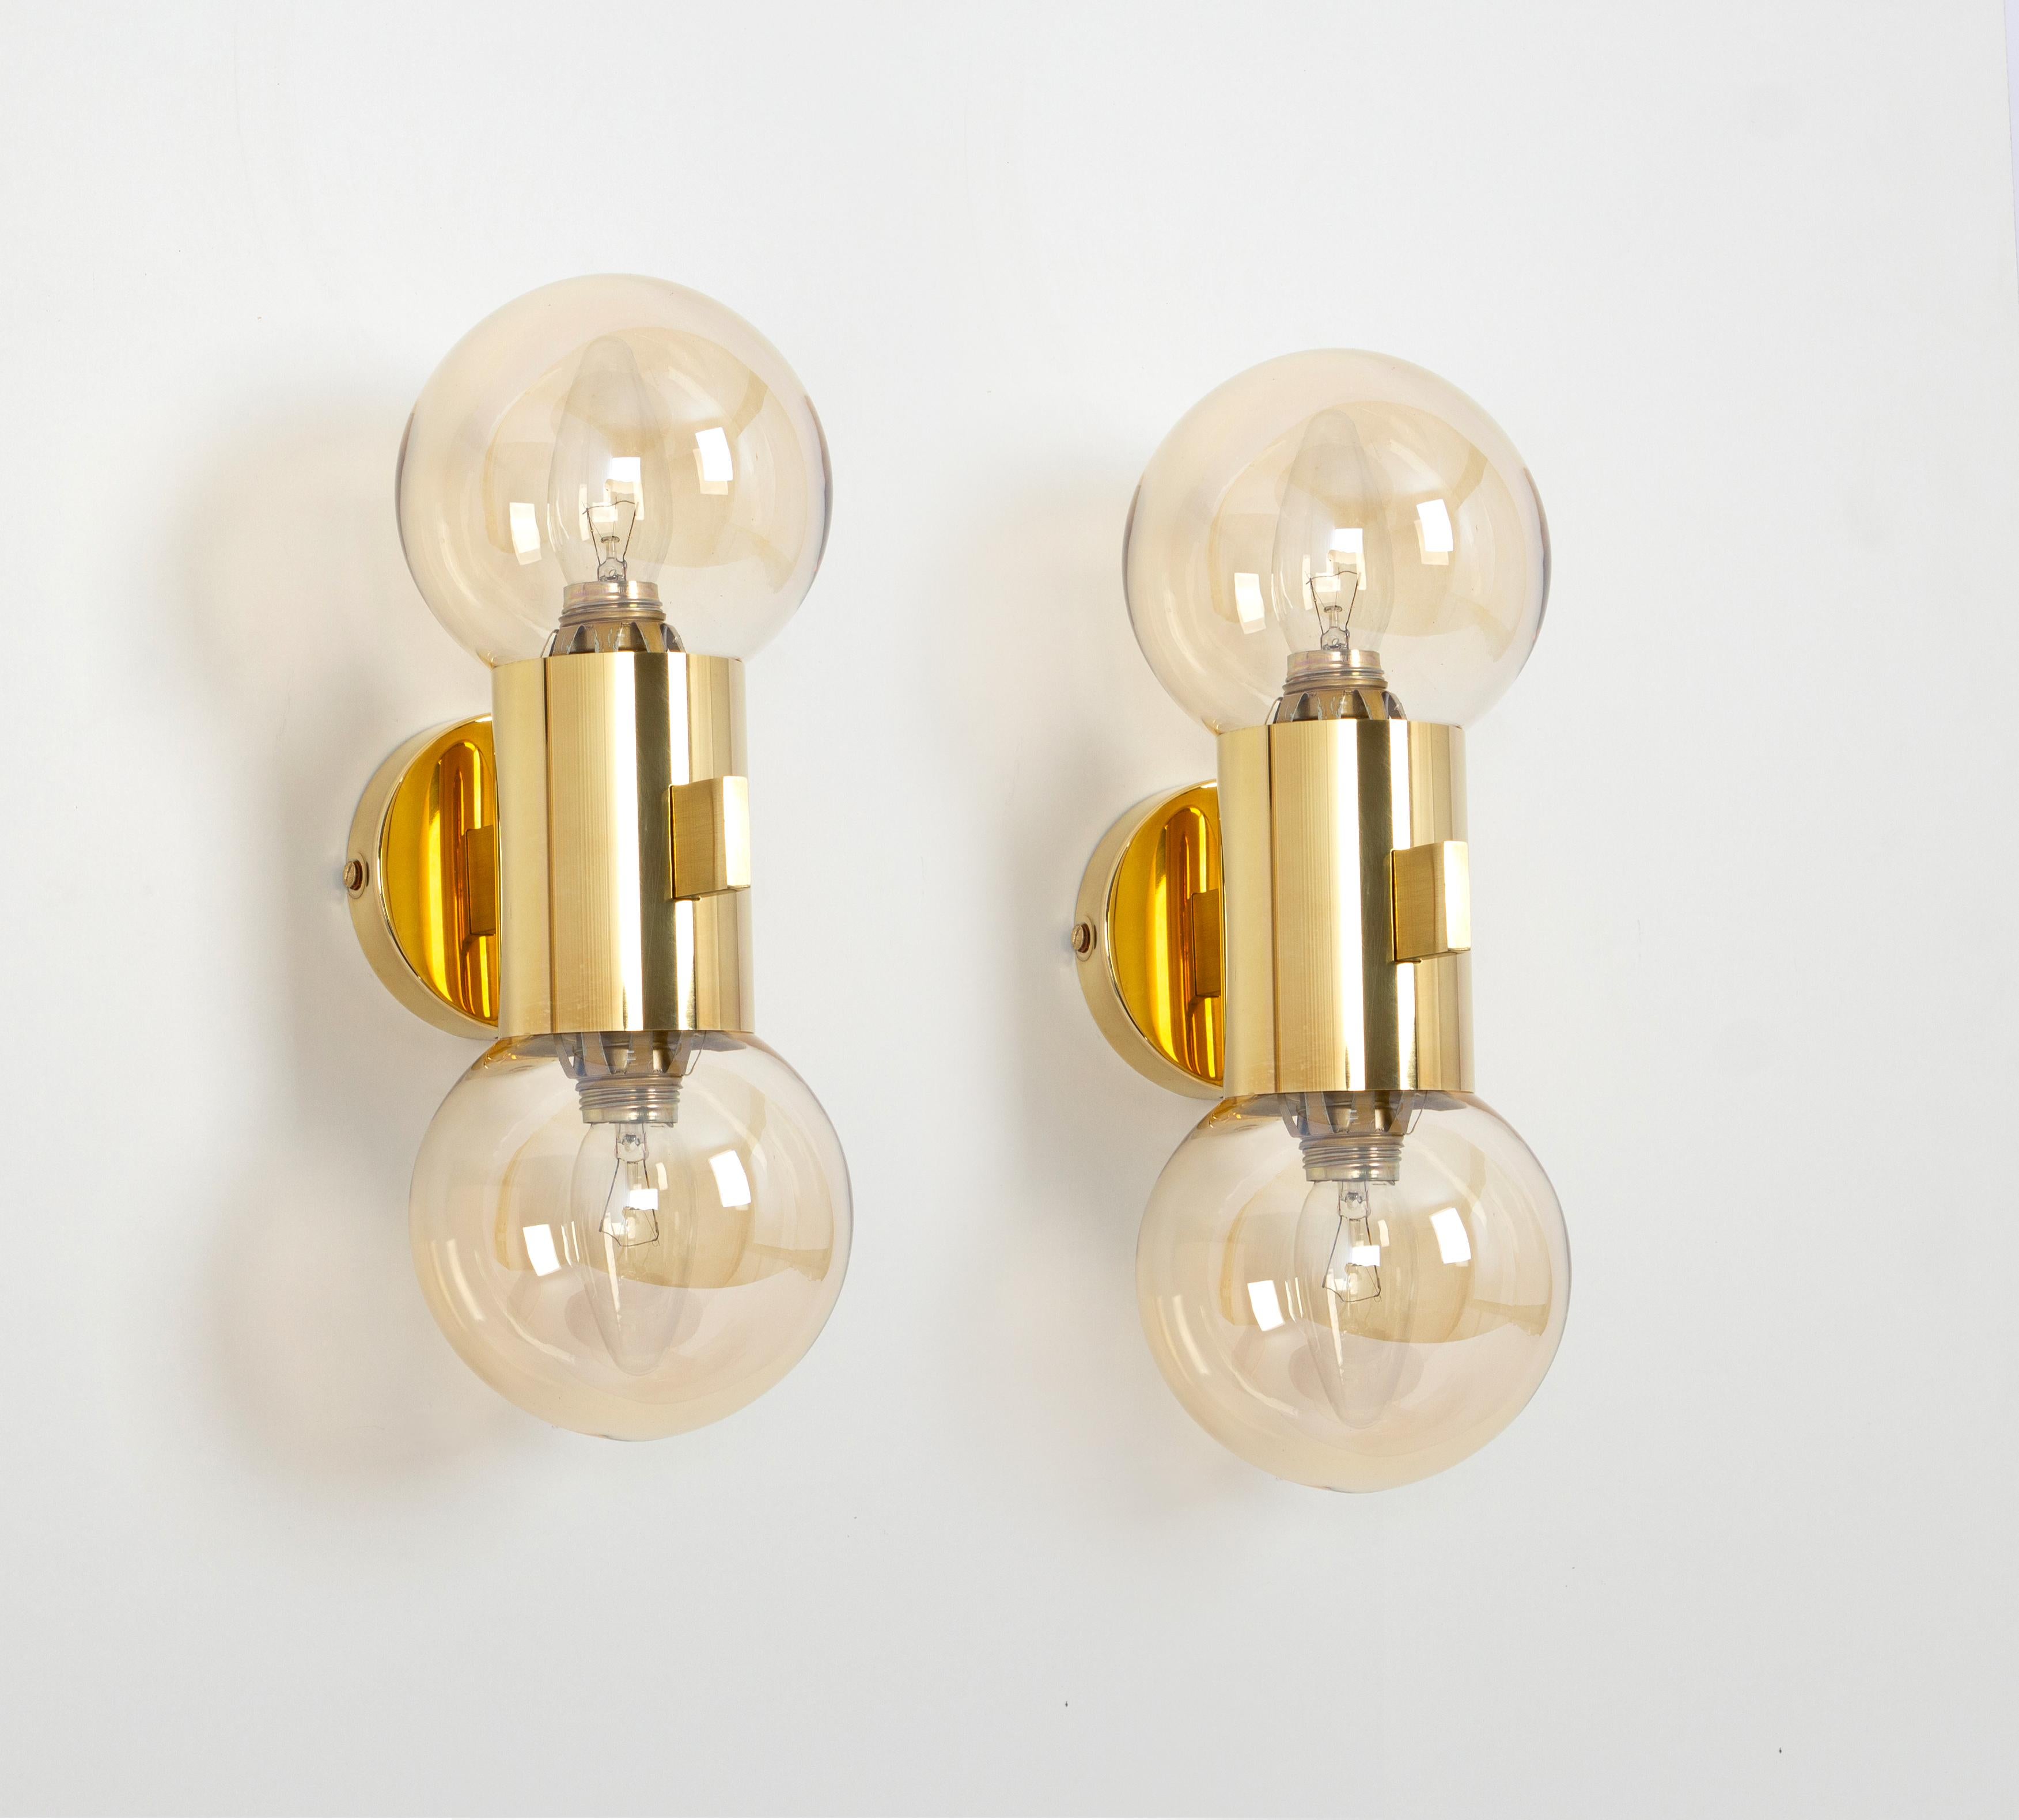 Pair of Brass and Smoke Glass Sconces, Sciolari Stil, Germany, 1970s For Sale 2